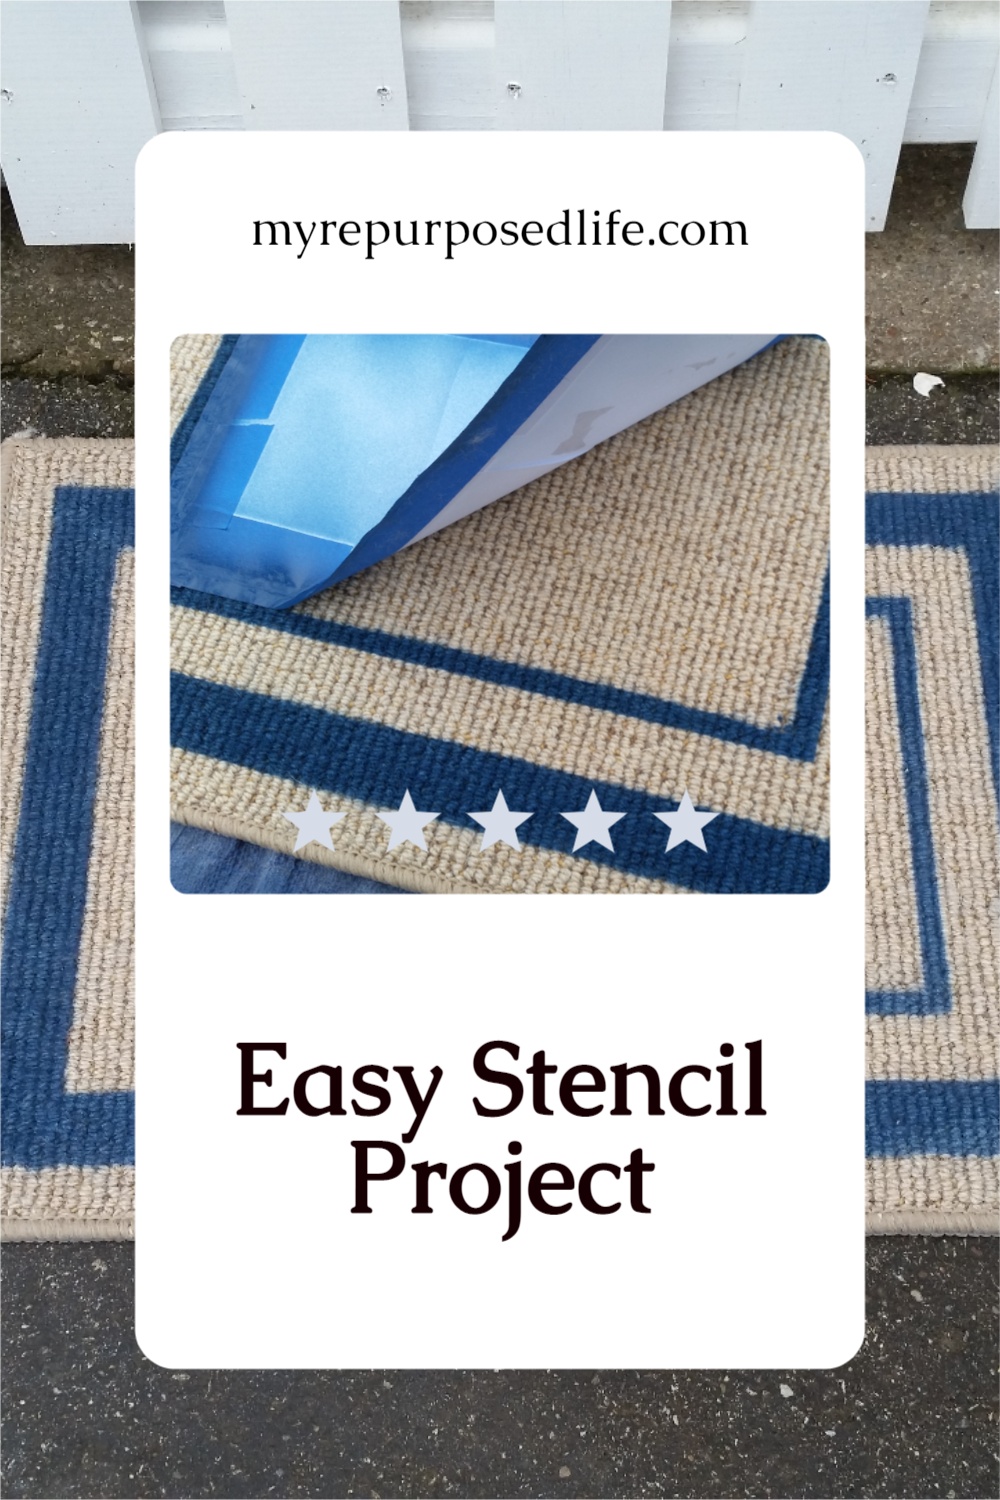 Step by step directions on how to change up an inexpensive rug or mat into a personalized welcome mat. This easy spray paint project can be completed in an afternoon. They make great gifts for friends, family, and neighbors. #myrepurposedlife #easy #spraypaint #diy #welcome #rug #mat #gifts via @repurposedlife